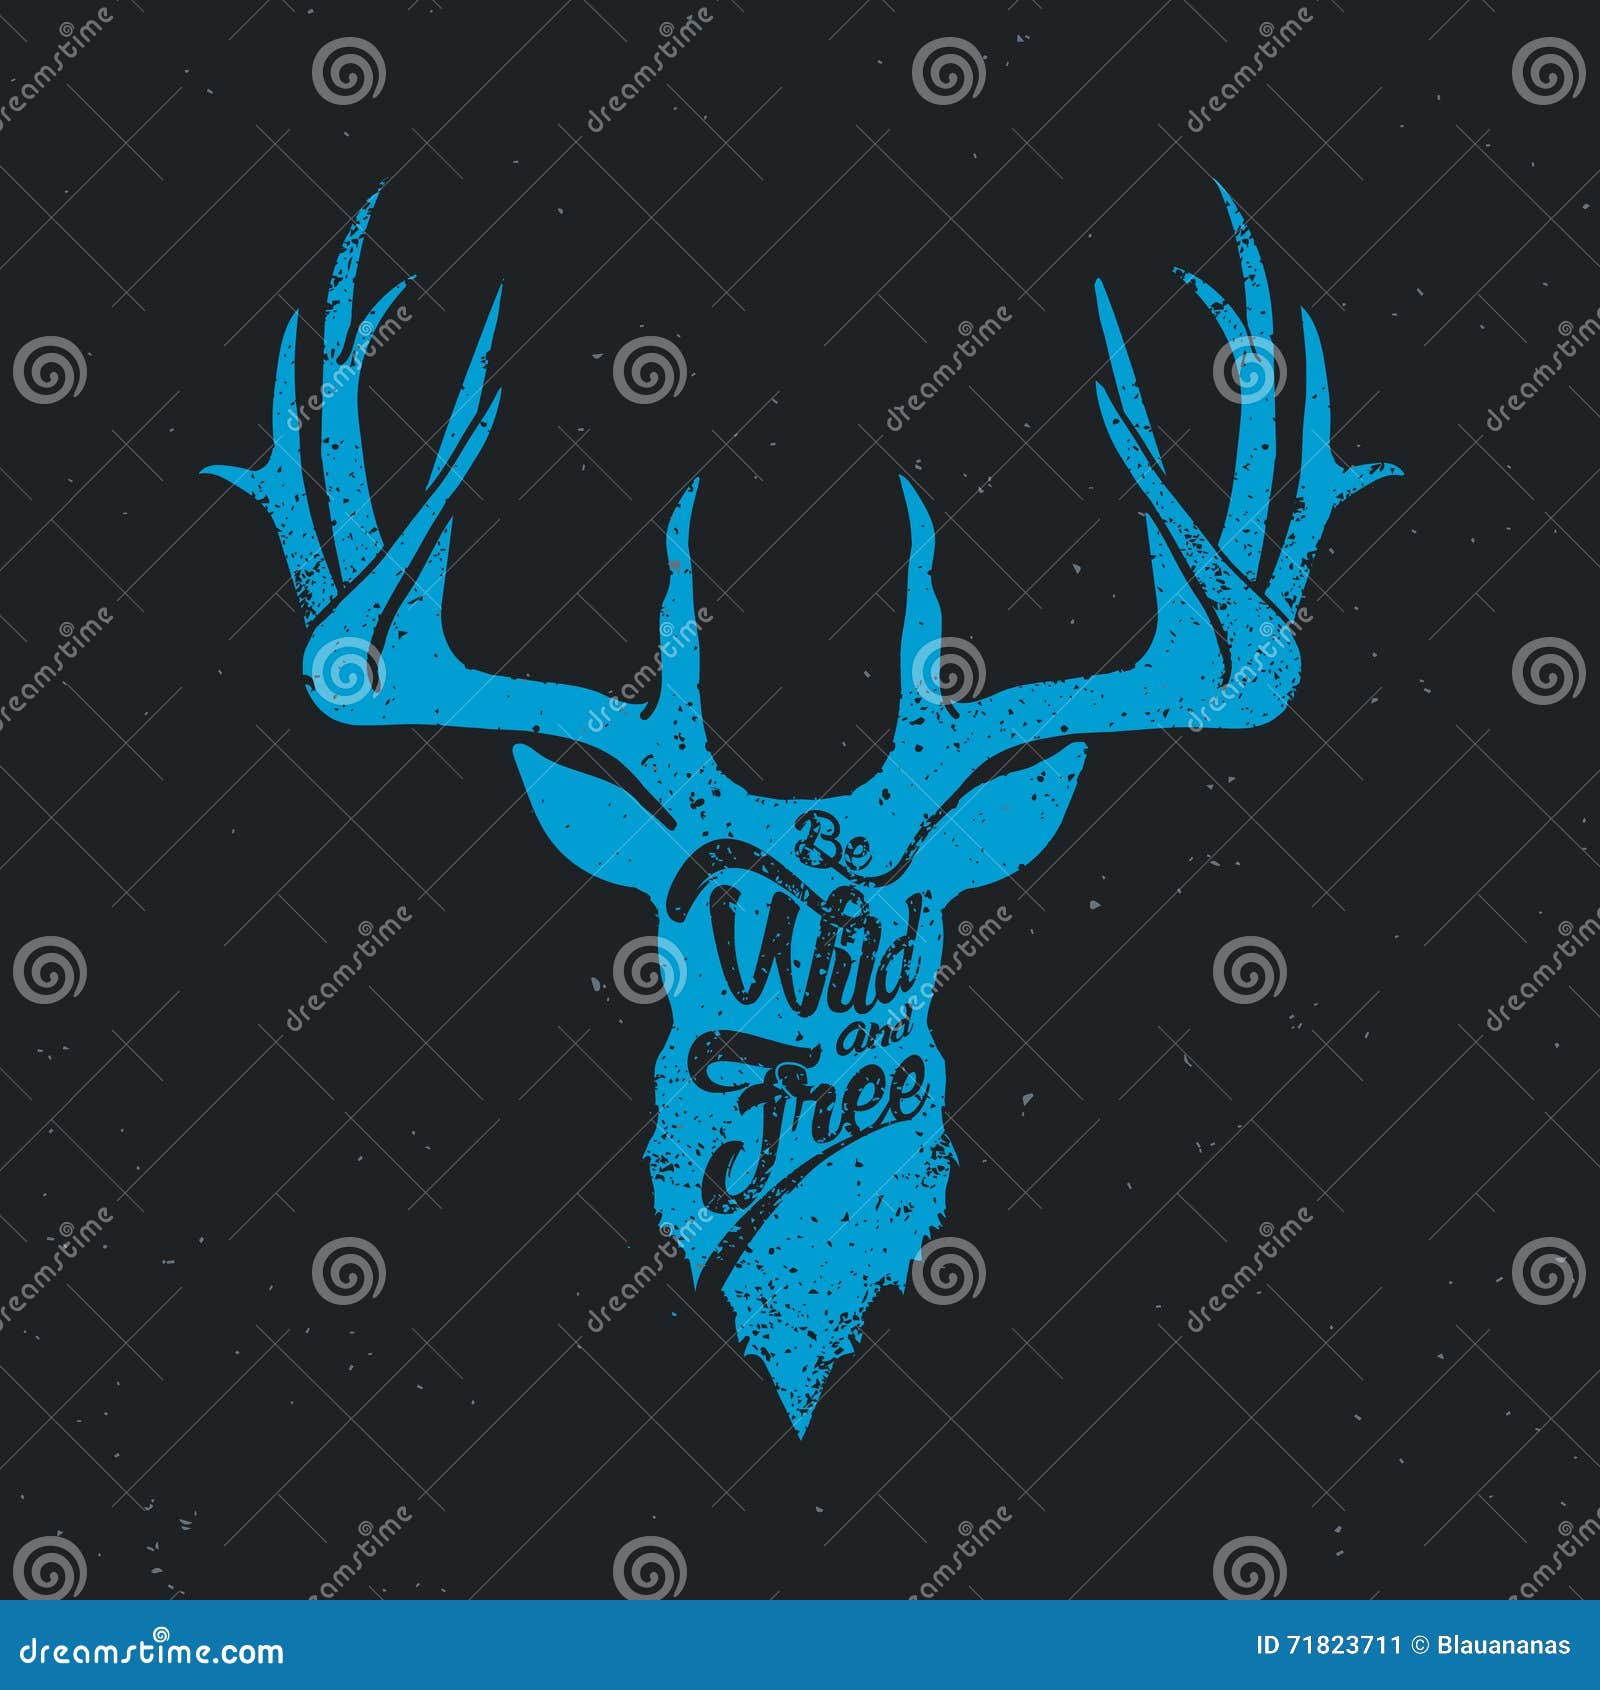 deer be wild and free invert blue